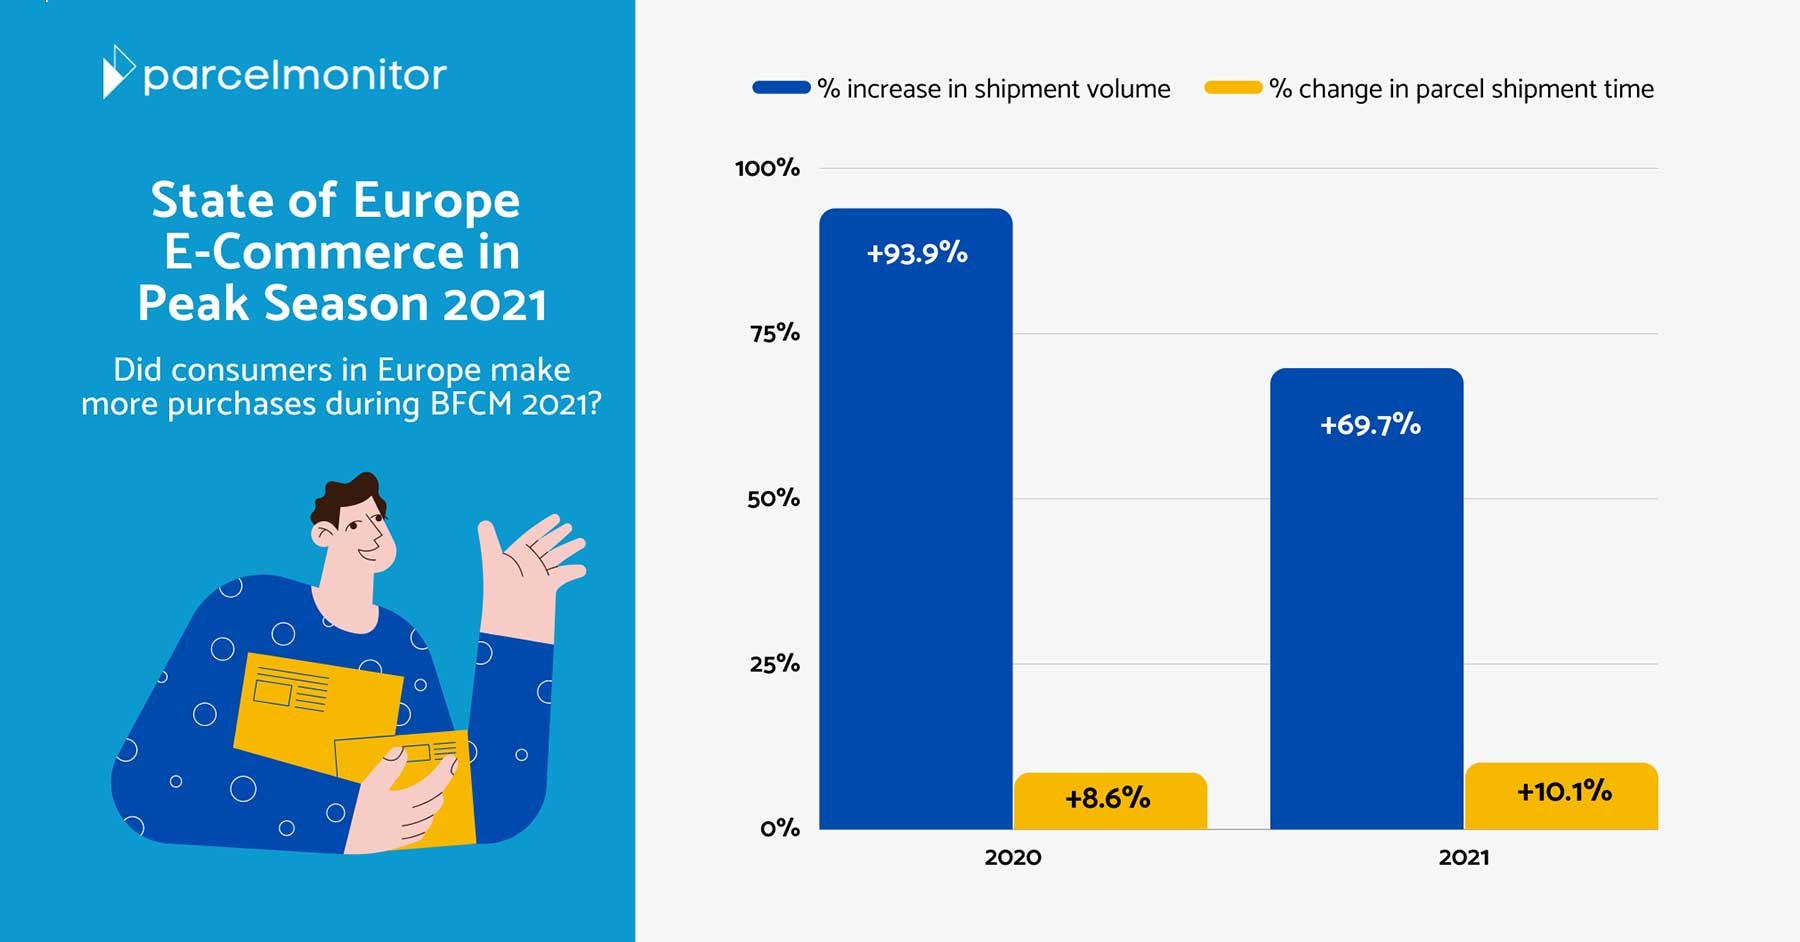 State of Europe E-Commerce in Peak Season 2021 Featured Image